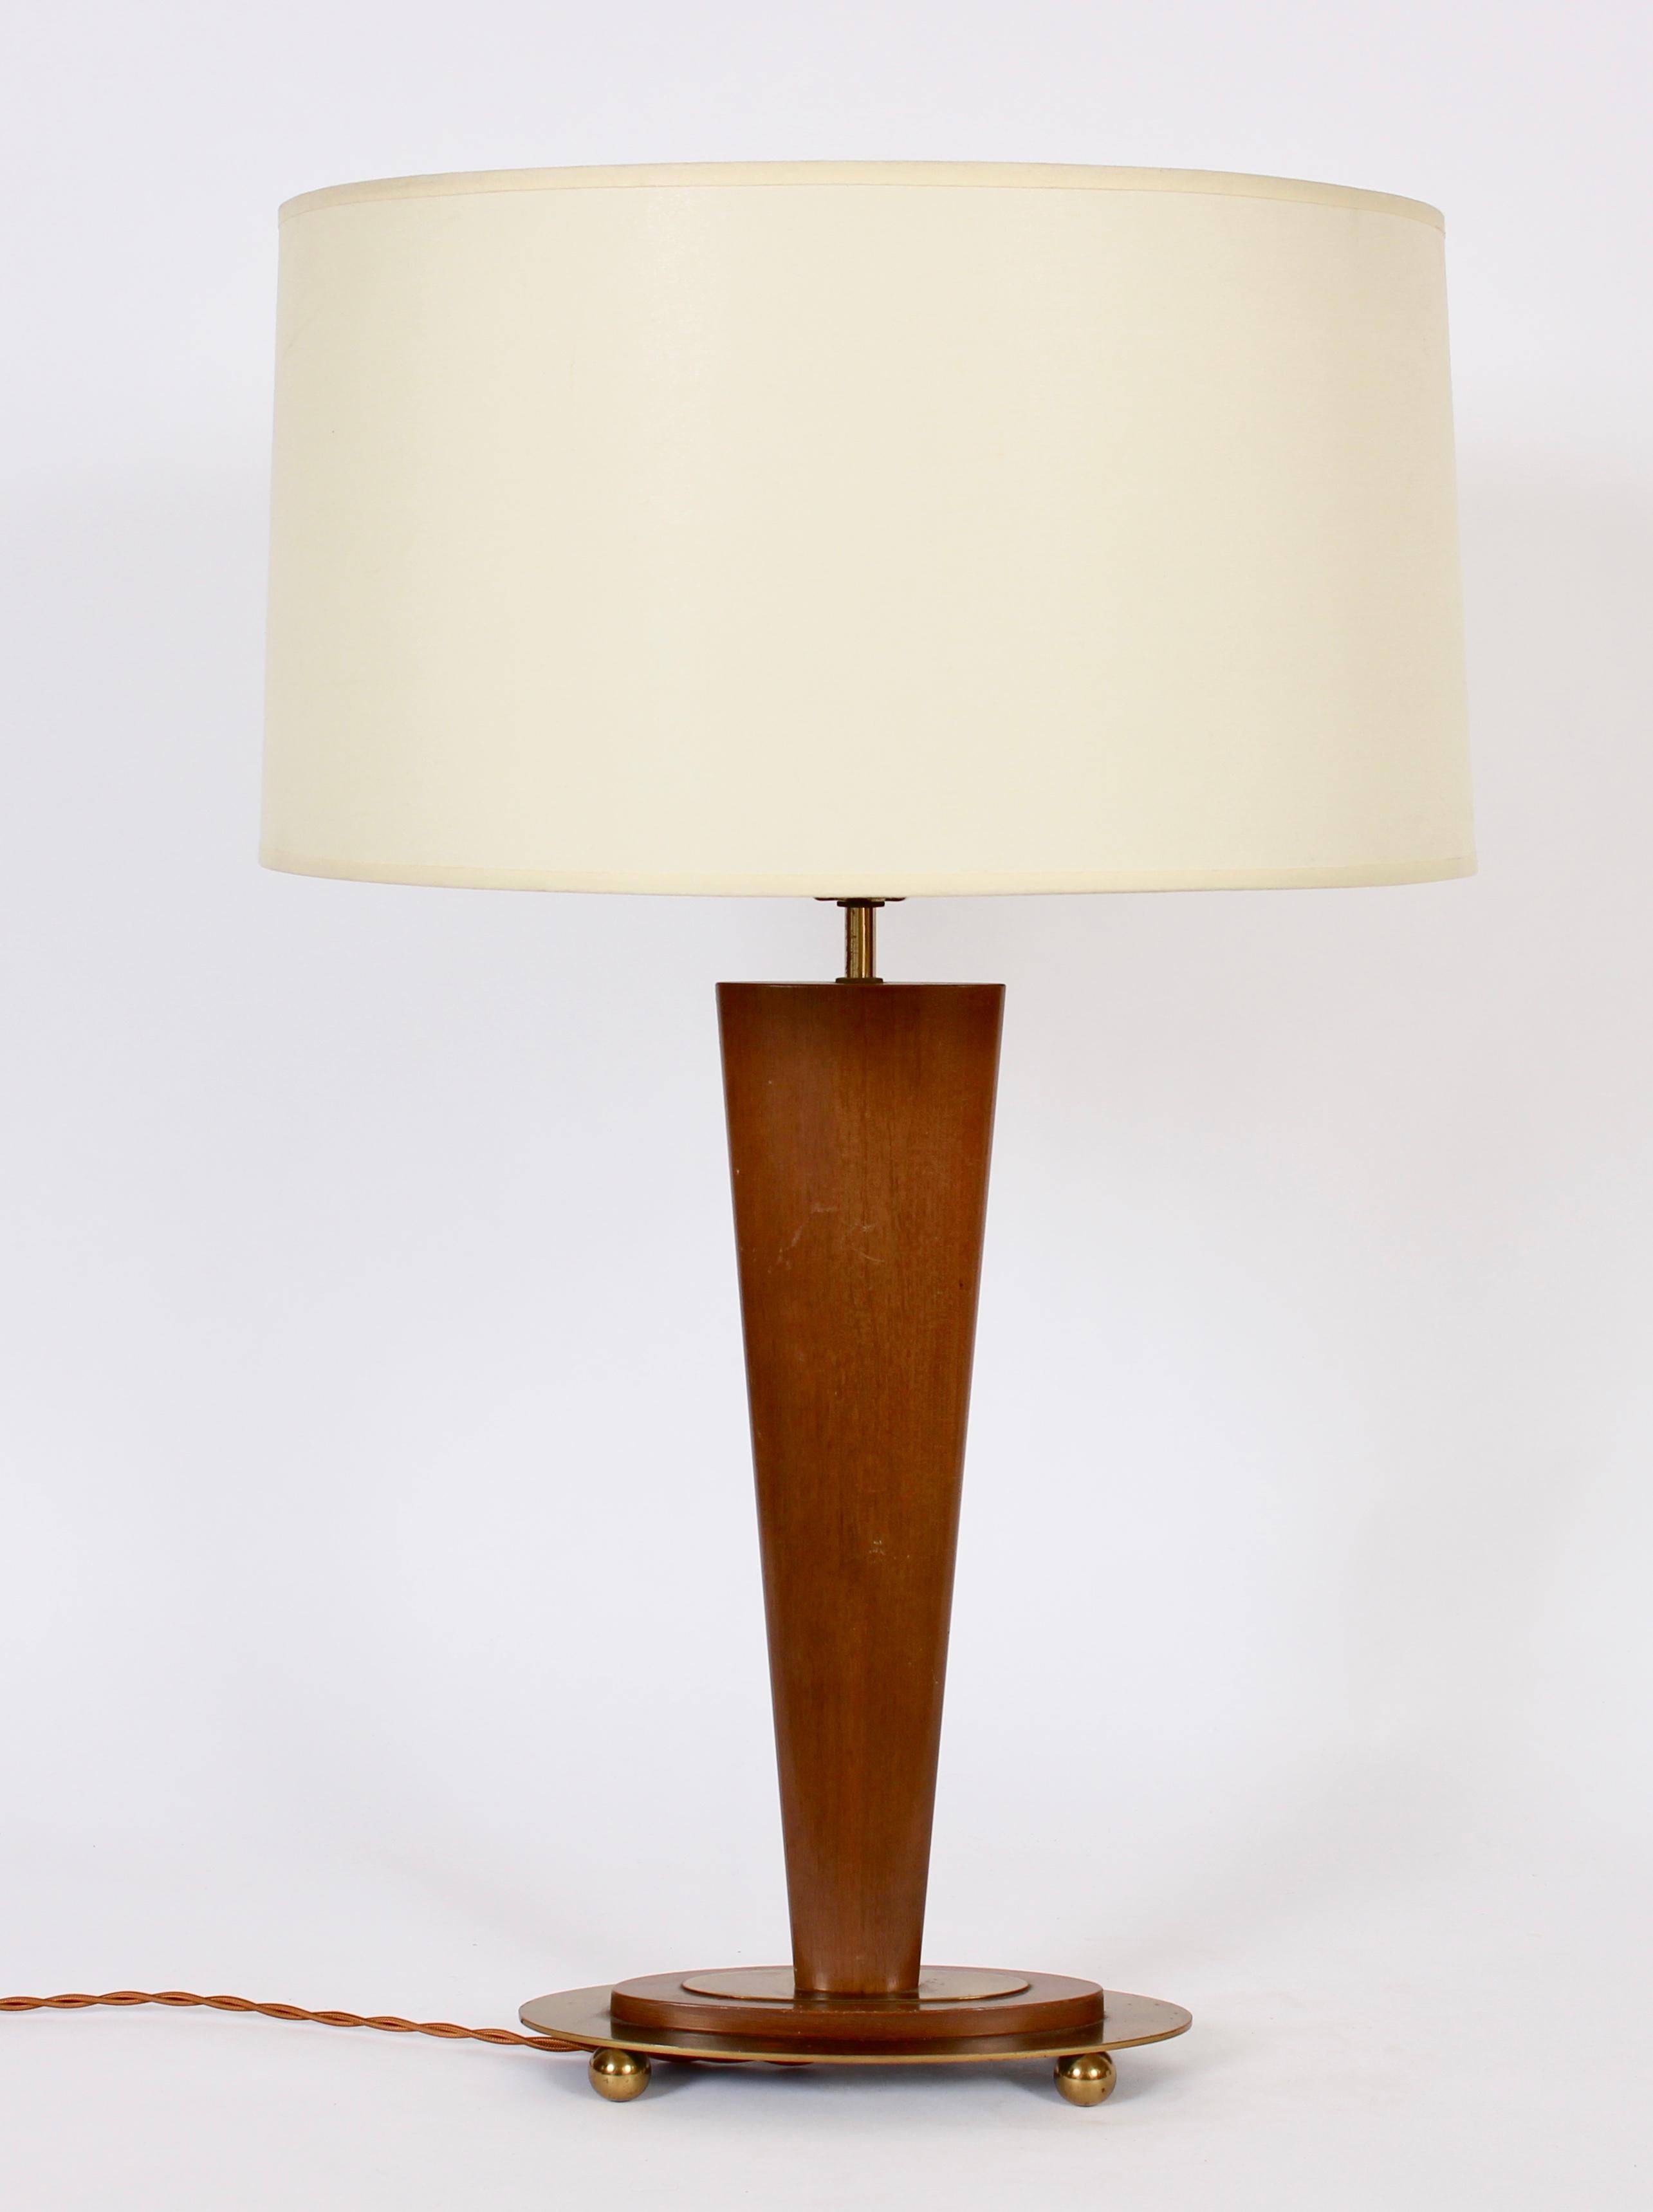 Tall Mutual Sunset Walnut & Brass Table Lamp on Footed Oval Base, 1950s For Sale 2